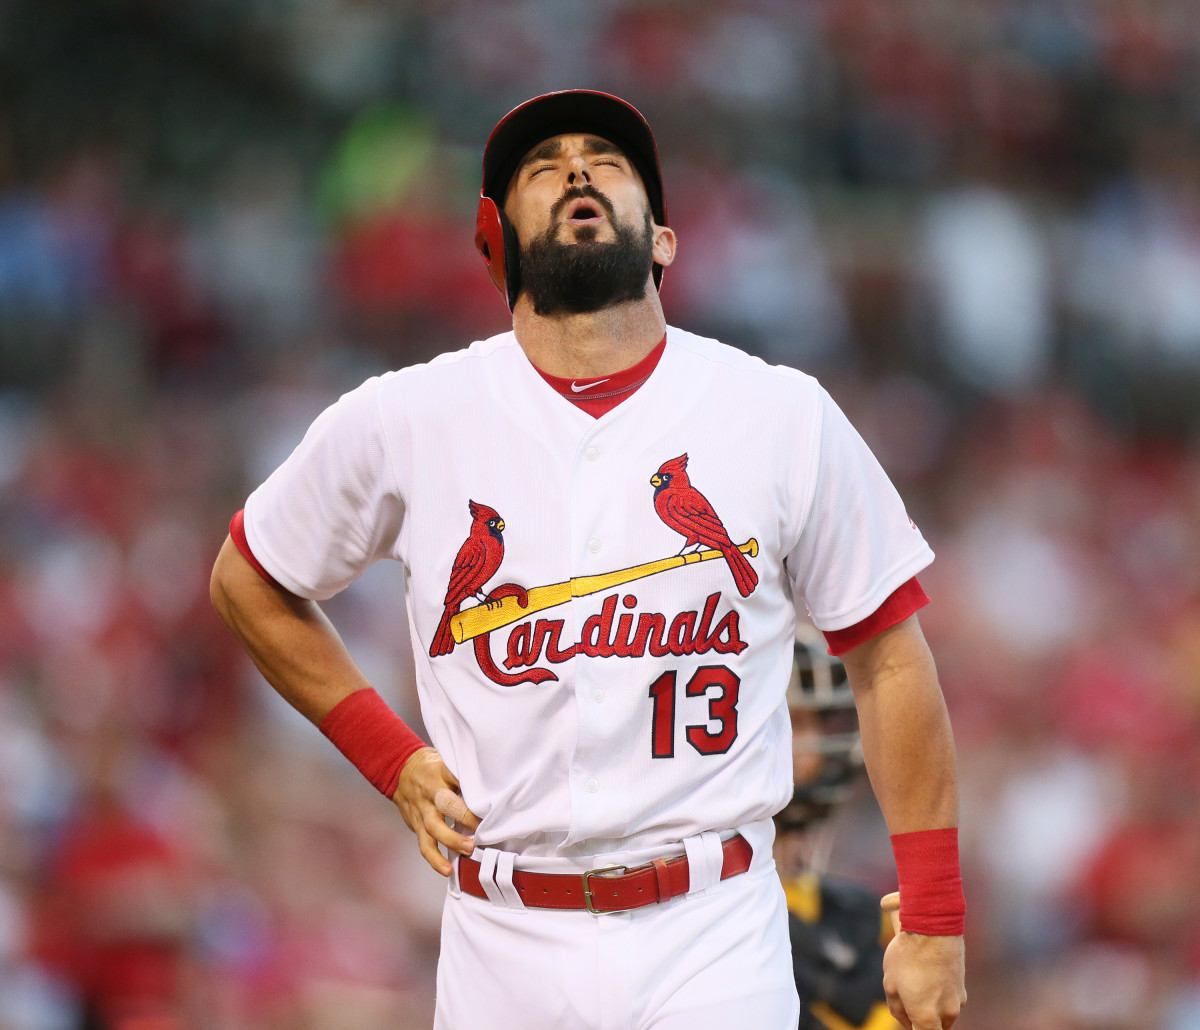 St. Louis Cardinals activate Carpenter from disabled list - Sports Illustrated